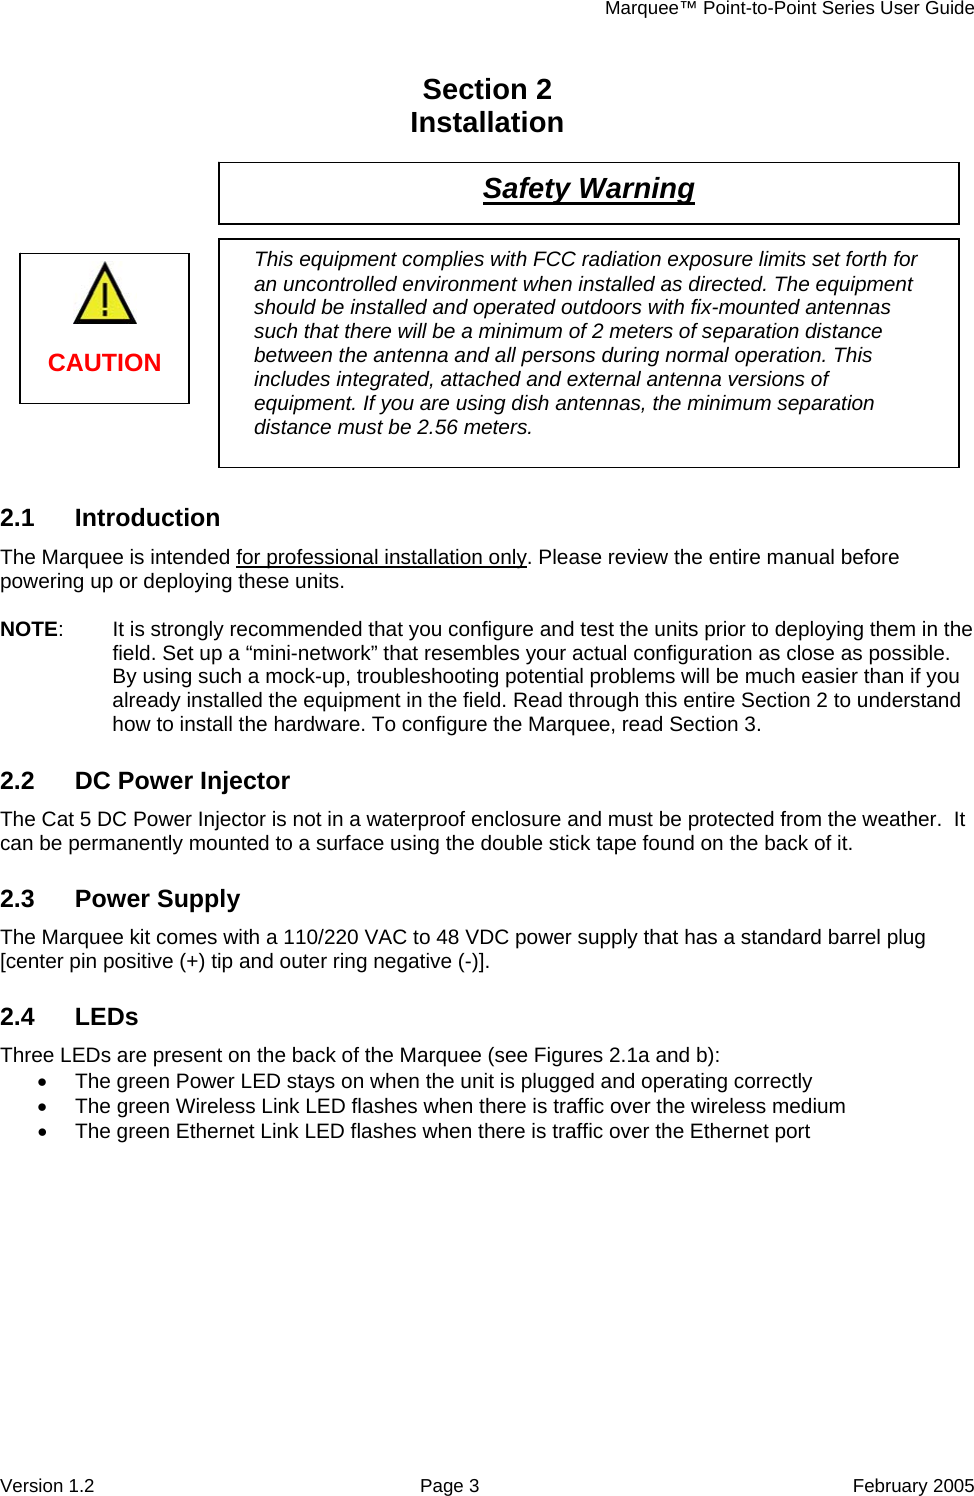     Marquee™ Point-to-Point Series User Guide Section 2    Installation   Safety Warning    This equipment complies with FCC radiation exposure limits set forth for an uncontrolled environment when installed as directed. The equipment should be installed and operated outdoors with fix-mounted antennas such that there will be a minimum of 2 meters of separation distance between the antenna and all persons during normal operation. This includes integrated, attached and external antenna versions of equipment. If you are using dish antennas, the minimum separation distance must be 2.56 meters.   CAUTION          2.1 Introduction The Marquee is intended for professional installation only. Please review the entire manual before powering up or deploying these units.  NOTE:  It is strongly recommended that you configure and test the units prior to deploying them in the field. Set up a “mini-network” that resembles your actual configuration as close as possible. By using such a mock-up, troubleshooting potential problems will be much easier than if you already installed the equipment in the field. Read through this entire Section 2 to understand how to install the hardware. To configure the Marquee, read Section 3. 2.2 DC Power Injector The Cat 5 DC Power Injector is not in a waterproof enclosure and must be protected from the weather.  It can be permanently mounted to a surface using the double stick tape found on the back of it. 2.3 Power Supply The Marquee kit comes with a 110/220 VAC to 48 VDC power supply that has a standard barrel plug [center pin positive (+) tip and outer ring negative (-)]. 2.4 LEDs Three LEDs are present on the back of the Marquee (see Figures 2.1a and b): •  The green Power LED stays on when the unit is plugged and operating correctly •  The green Wireless Link LED flashes when there is traffic over the wireless medium •  The green Ethernet Link LED flashes when there is traffic over the Ethernet port Version 1.2  Page 3  February 2005 